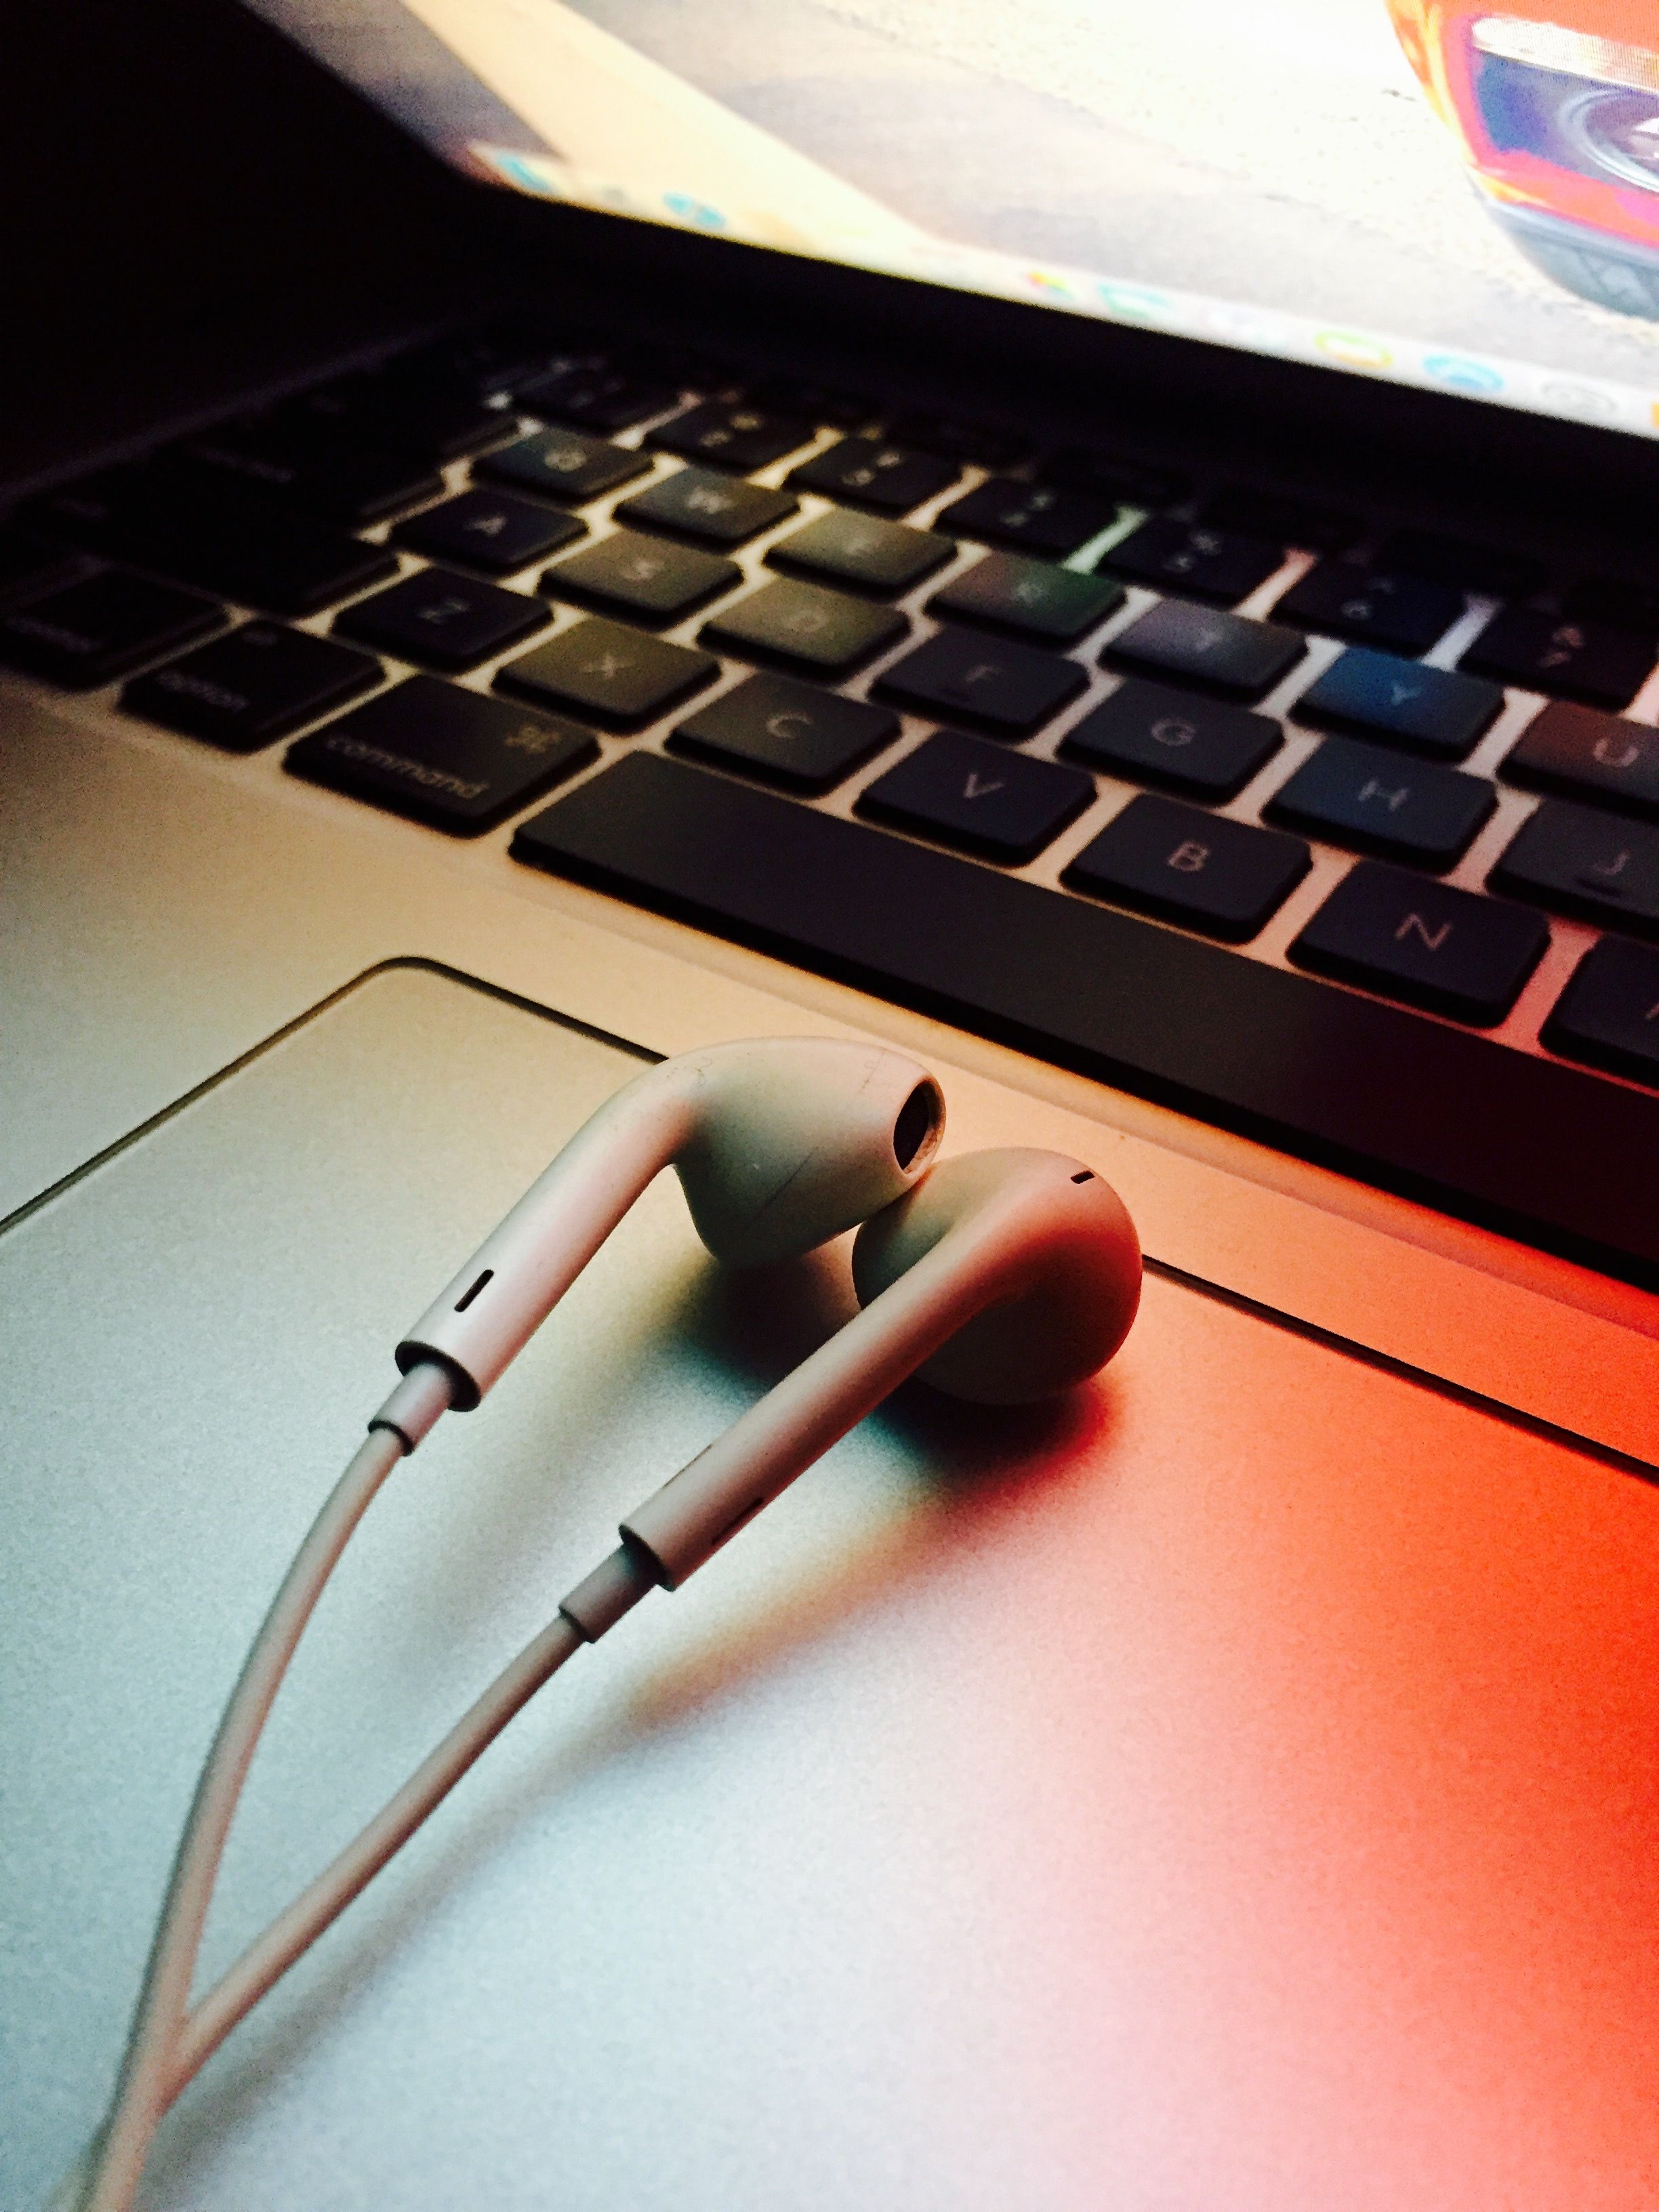 Macbook and EarPods. iPhone wallpaper music, Cool picture for wallpaper, Pastel photography